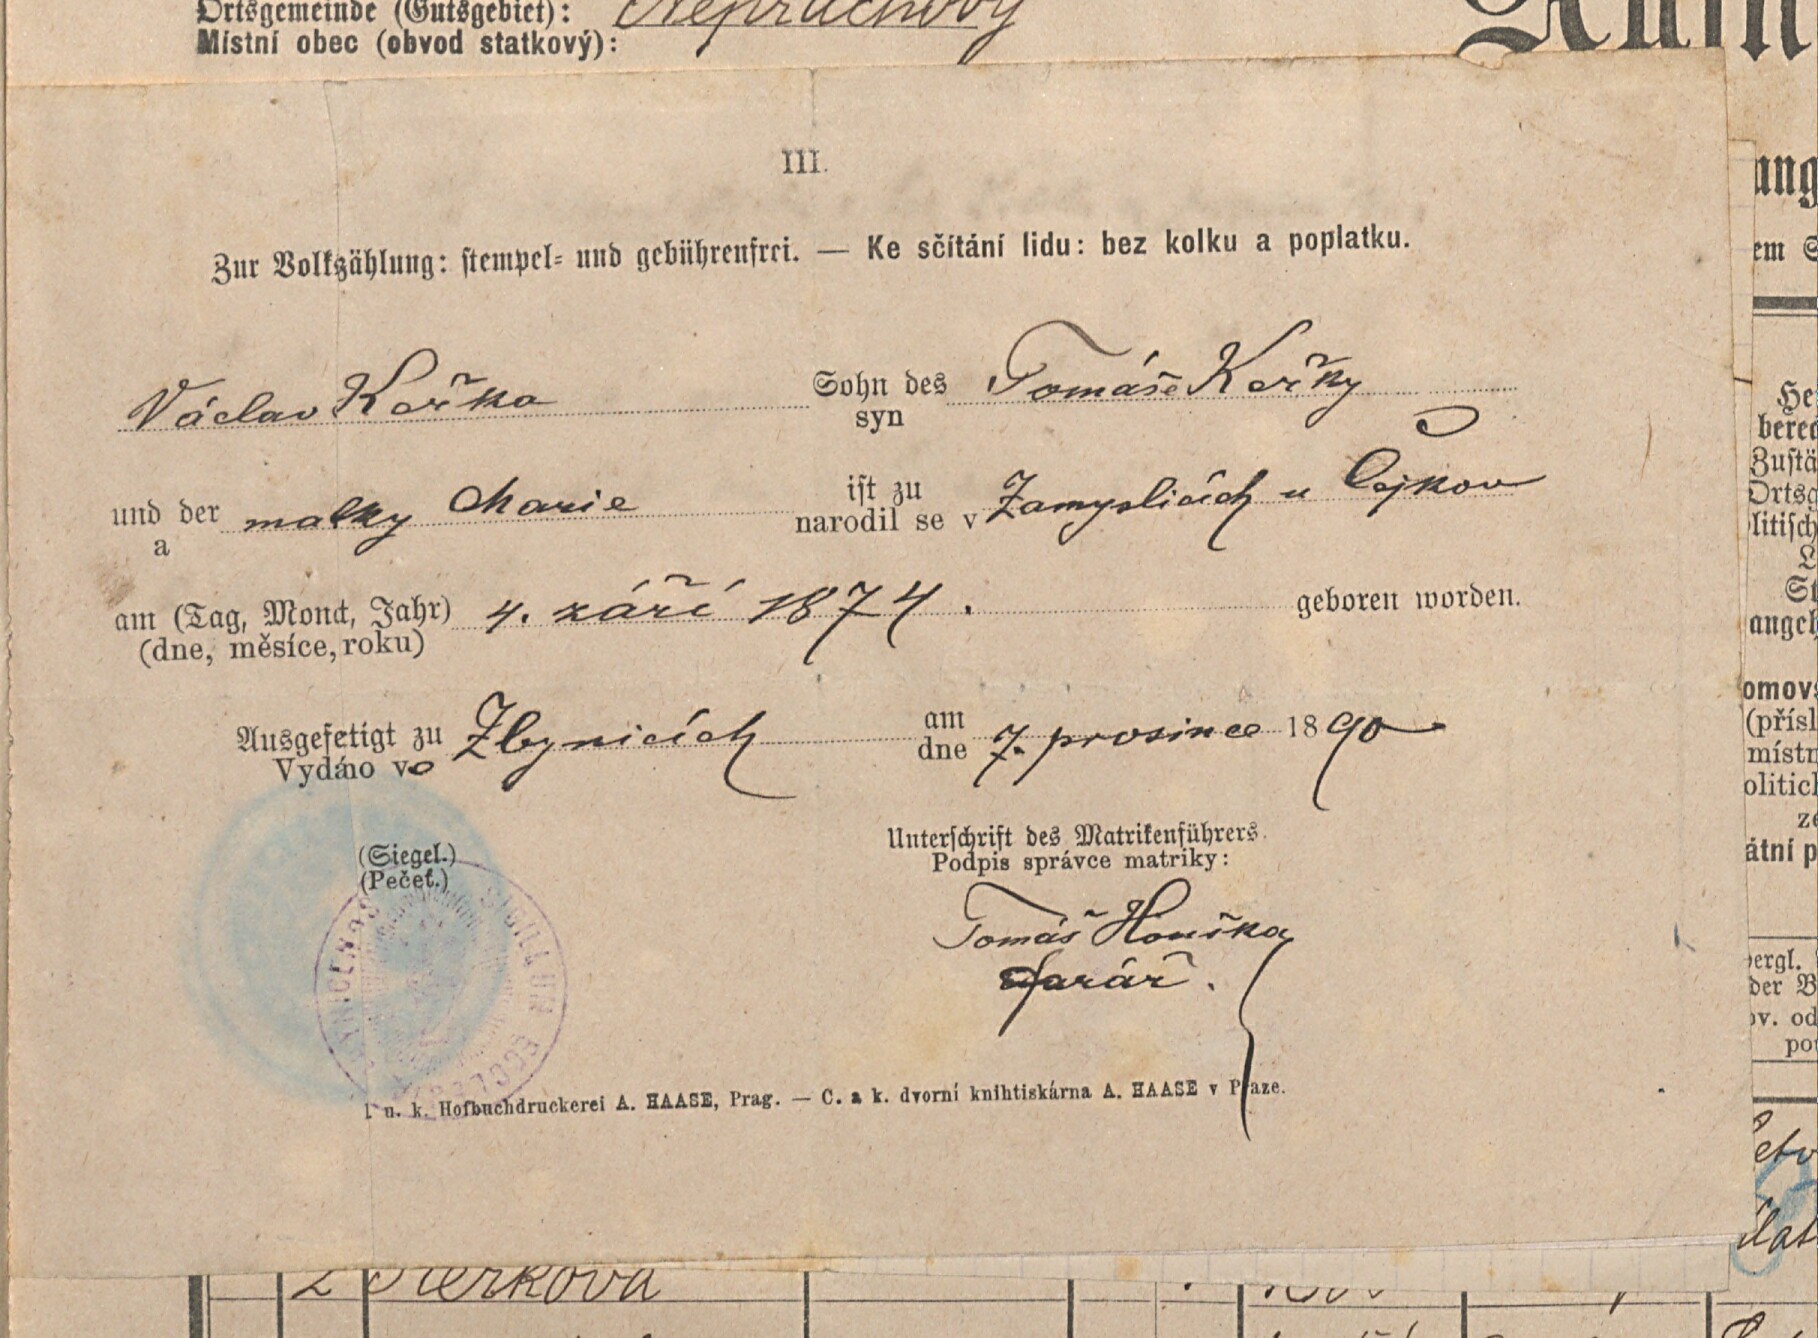 4. soap-kt_01159_census-1890-neprochovy-cp001_0040